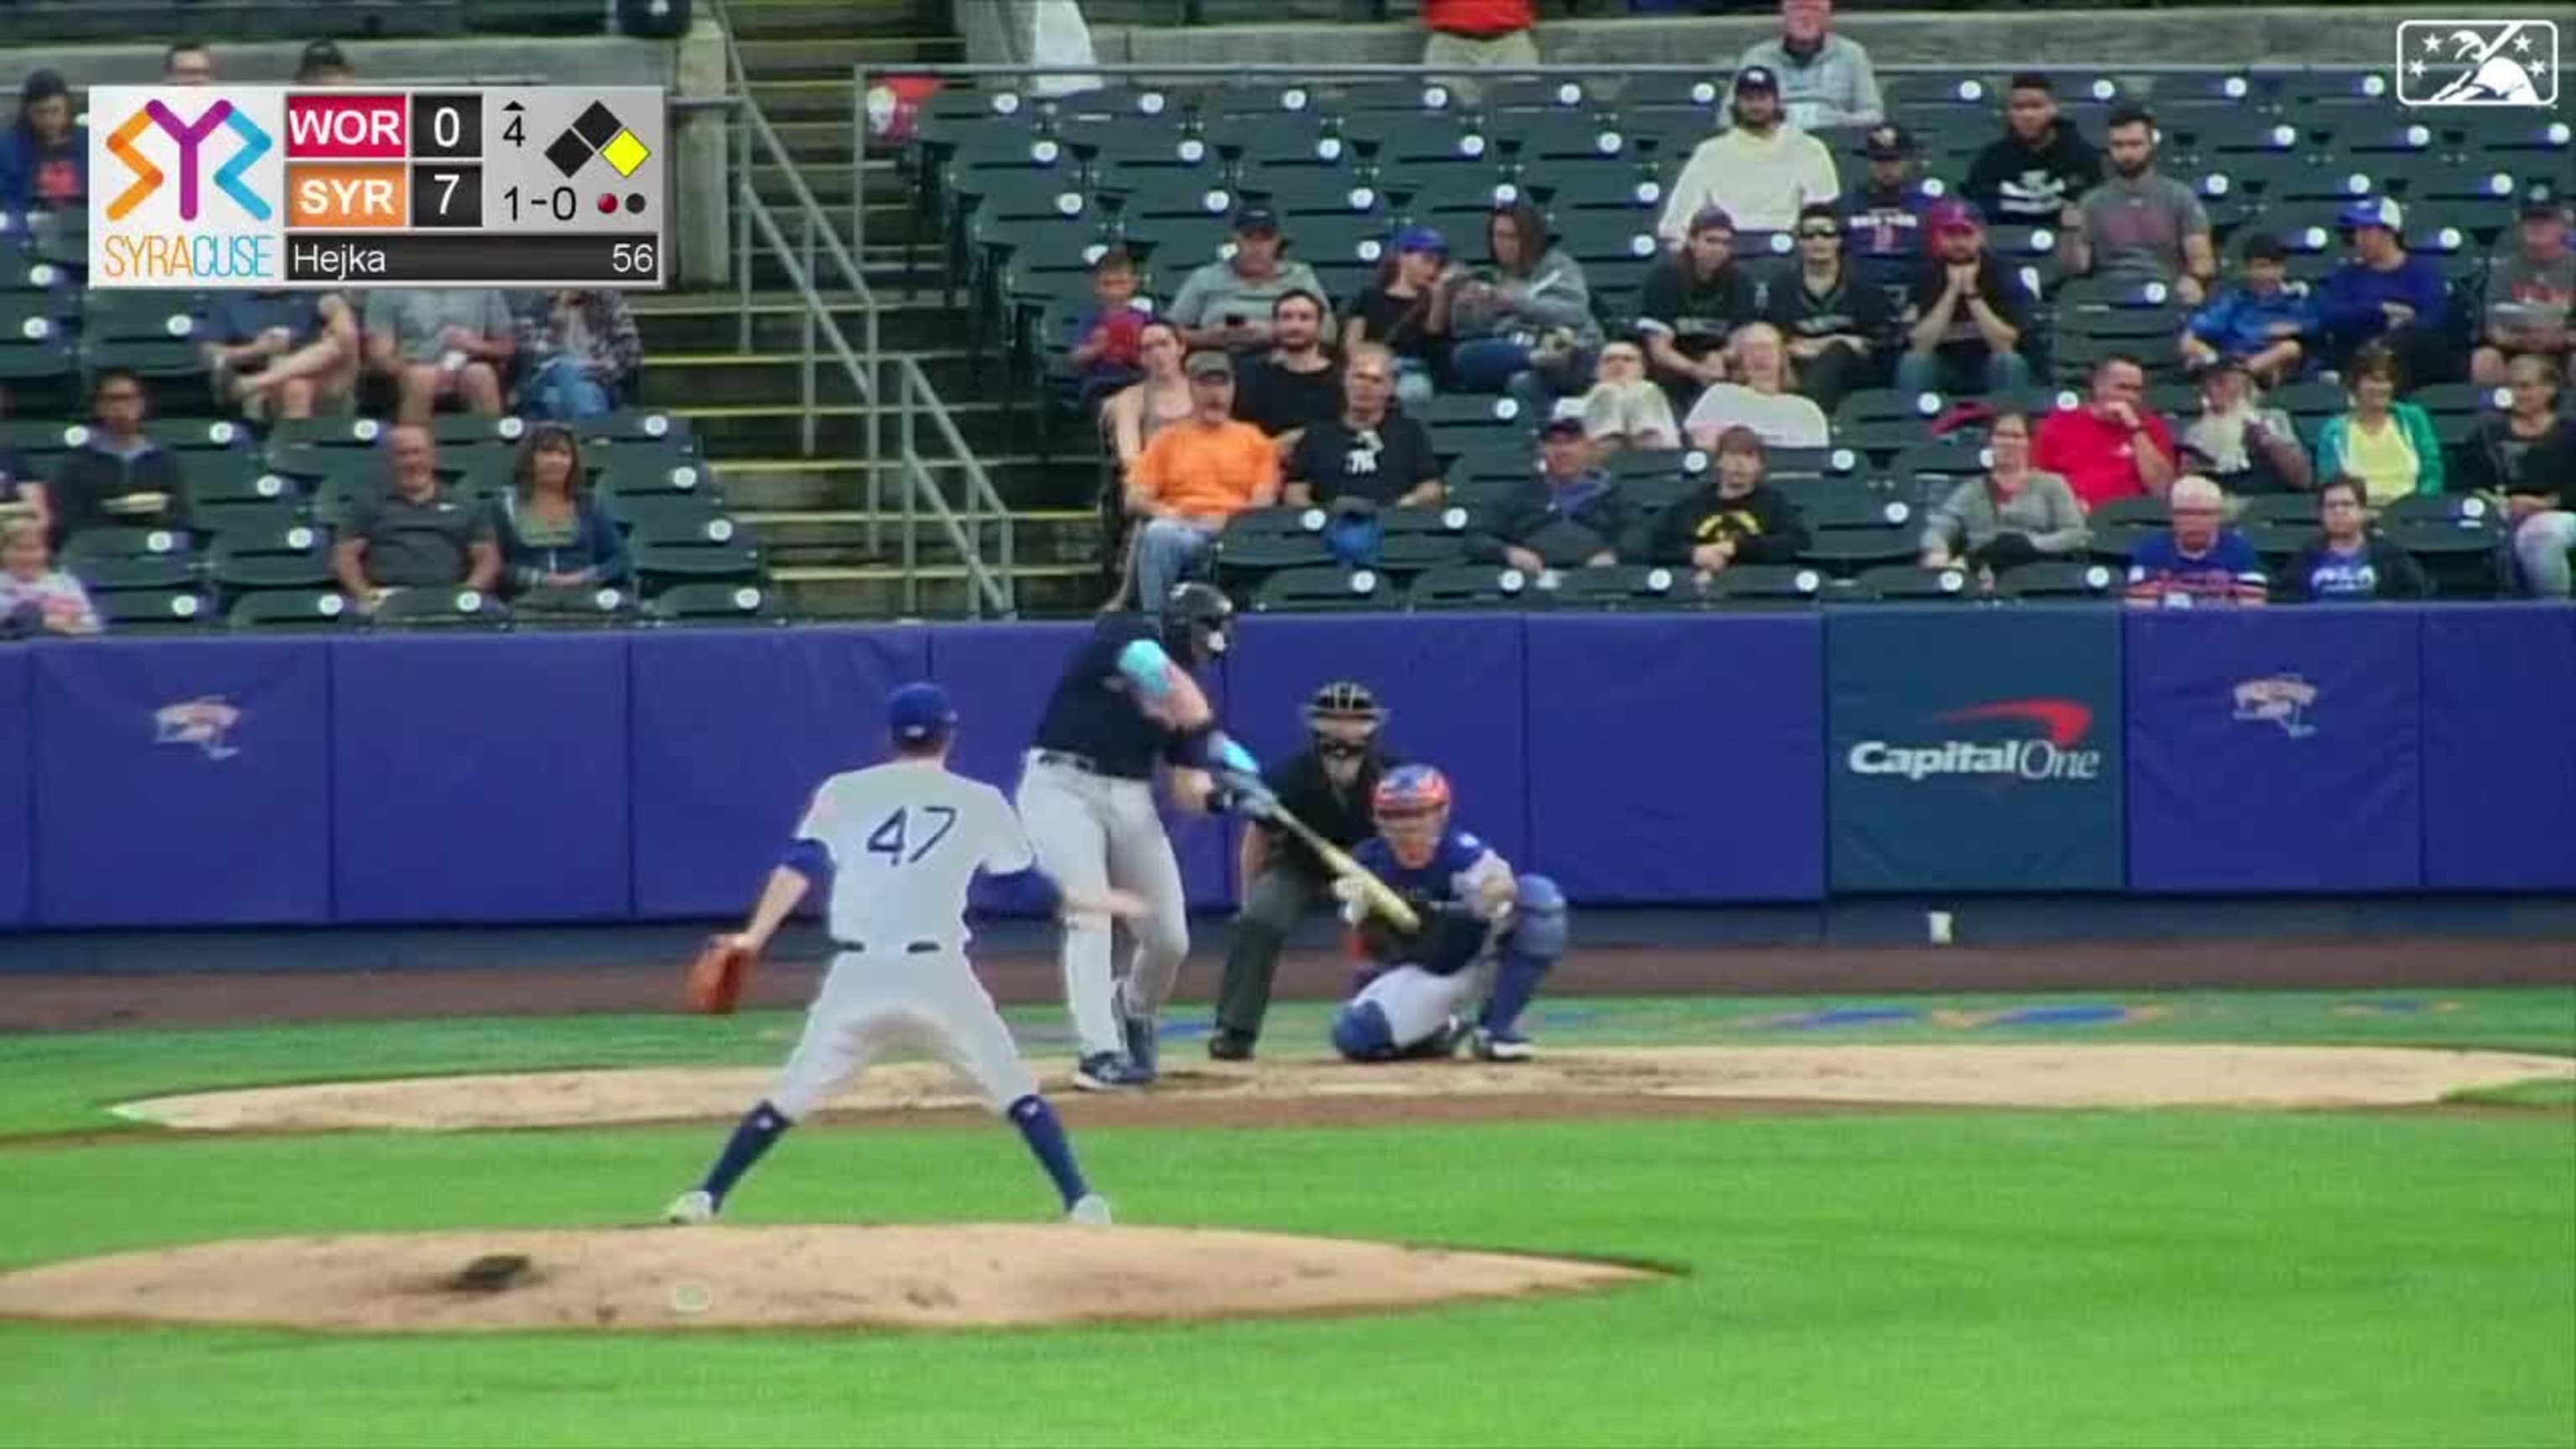 Top MLB draft prospect crushes HR amid 'overrated' chants - ESPN Video